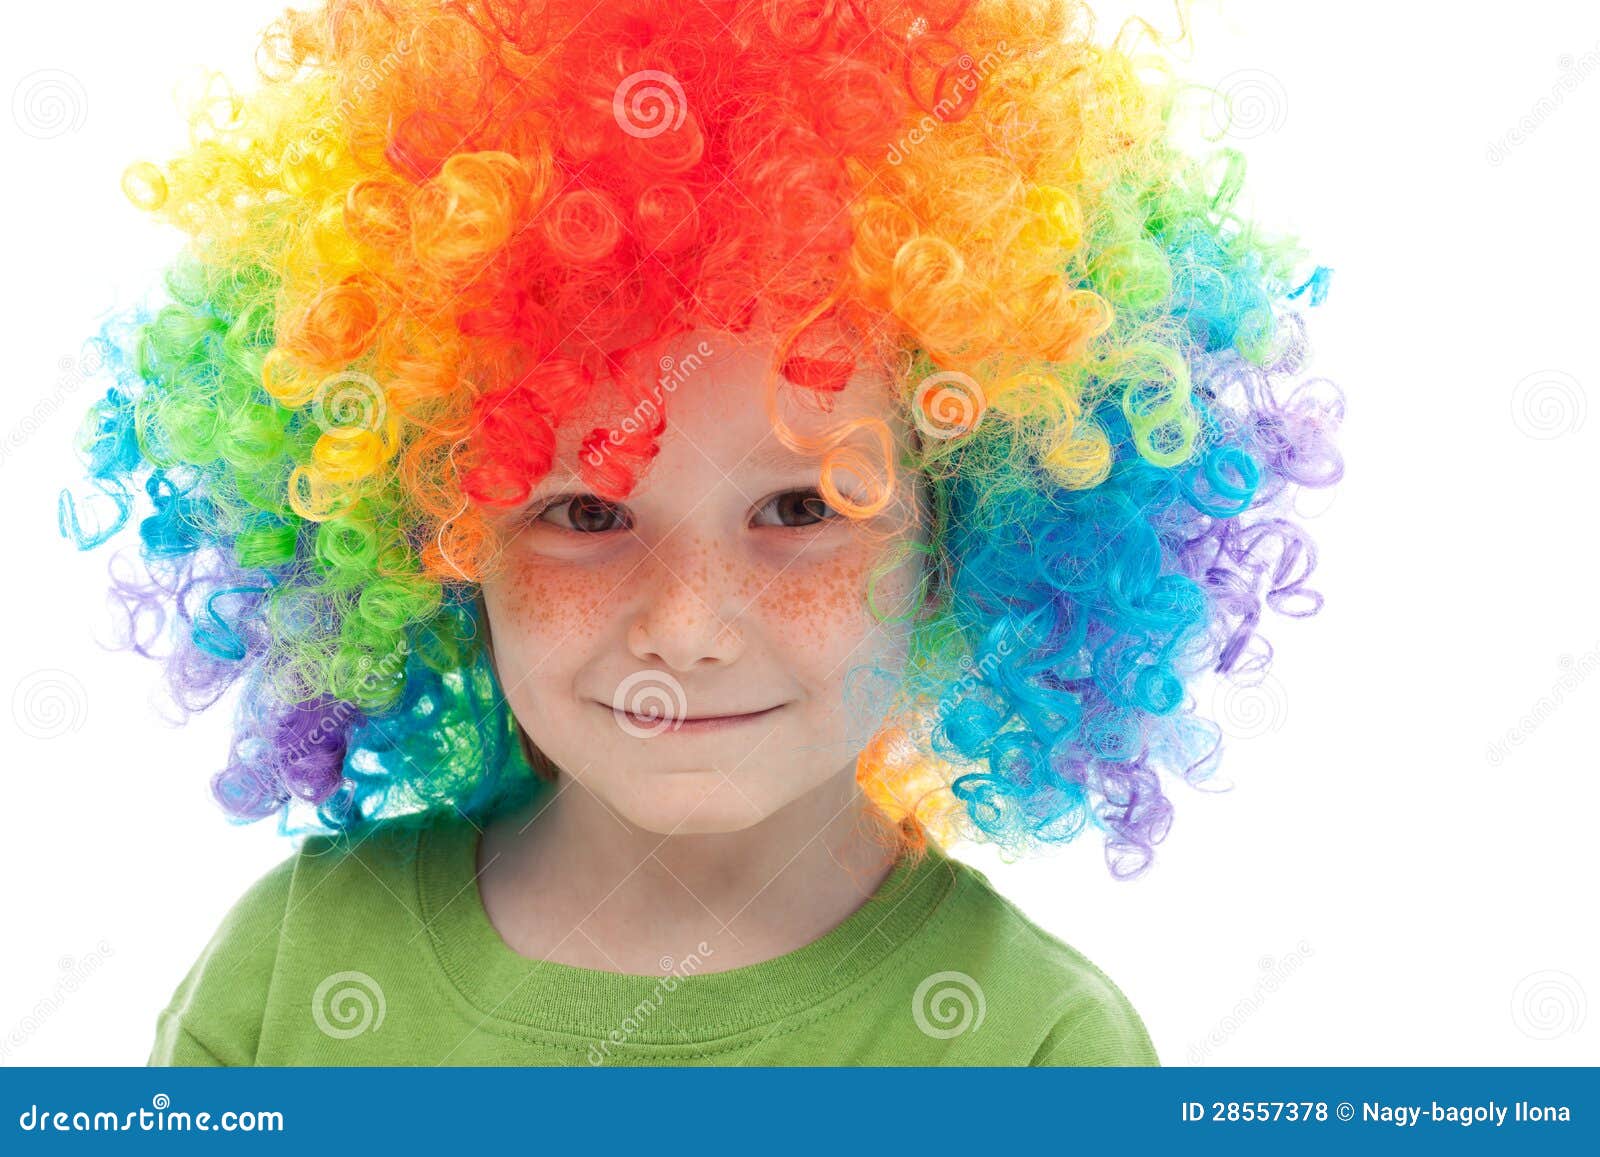 Cute Boy with Freckles and Clown Hair Stock Photo - Image of portrait ...